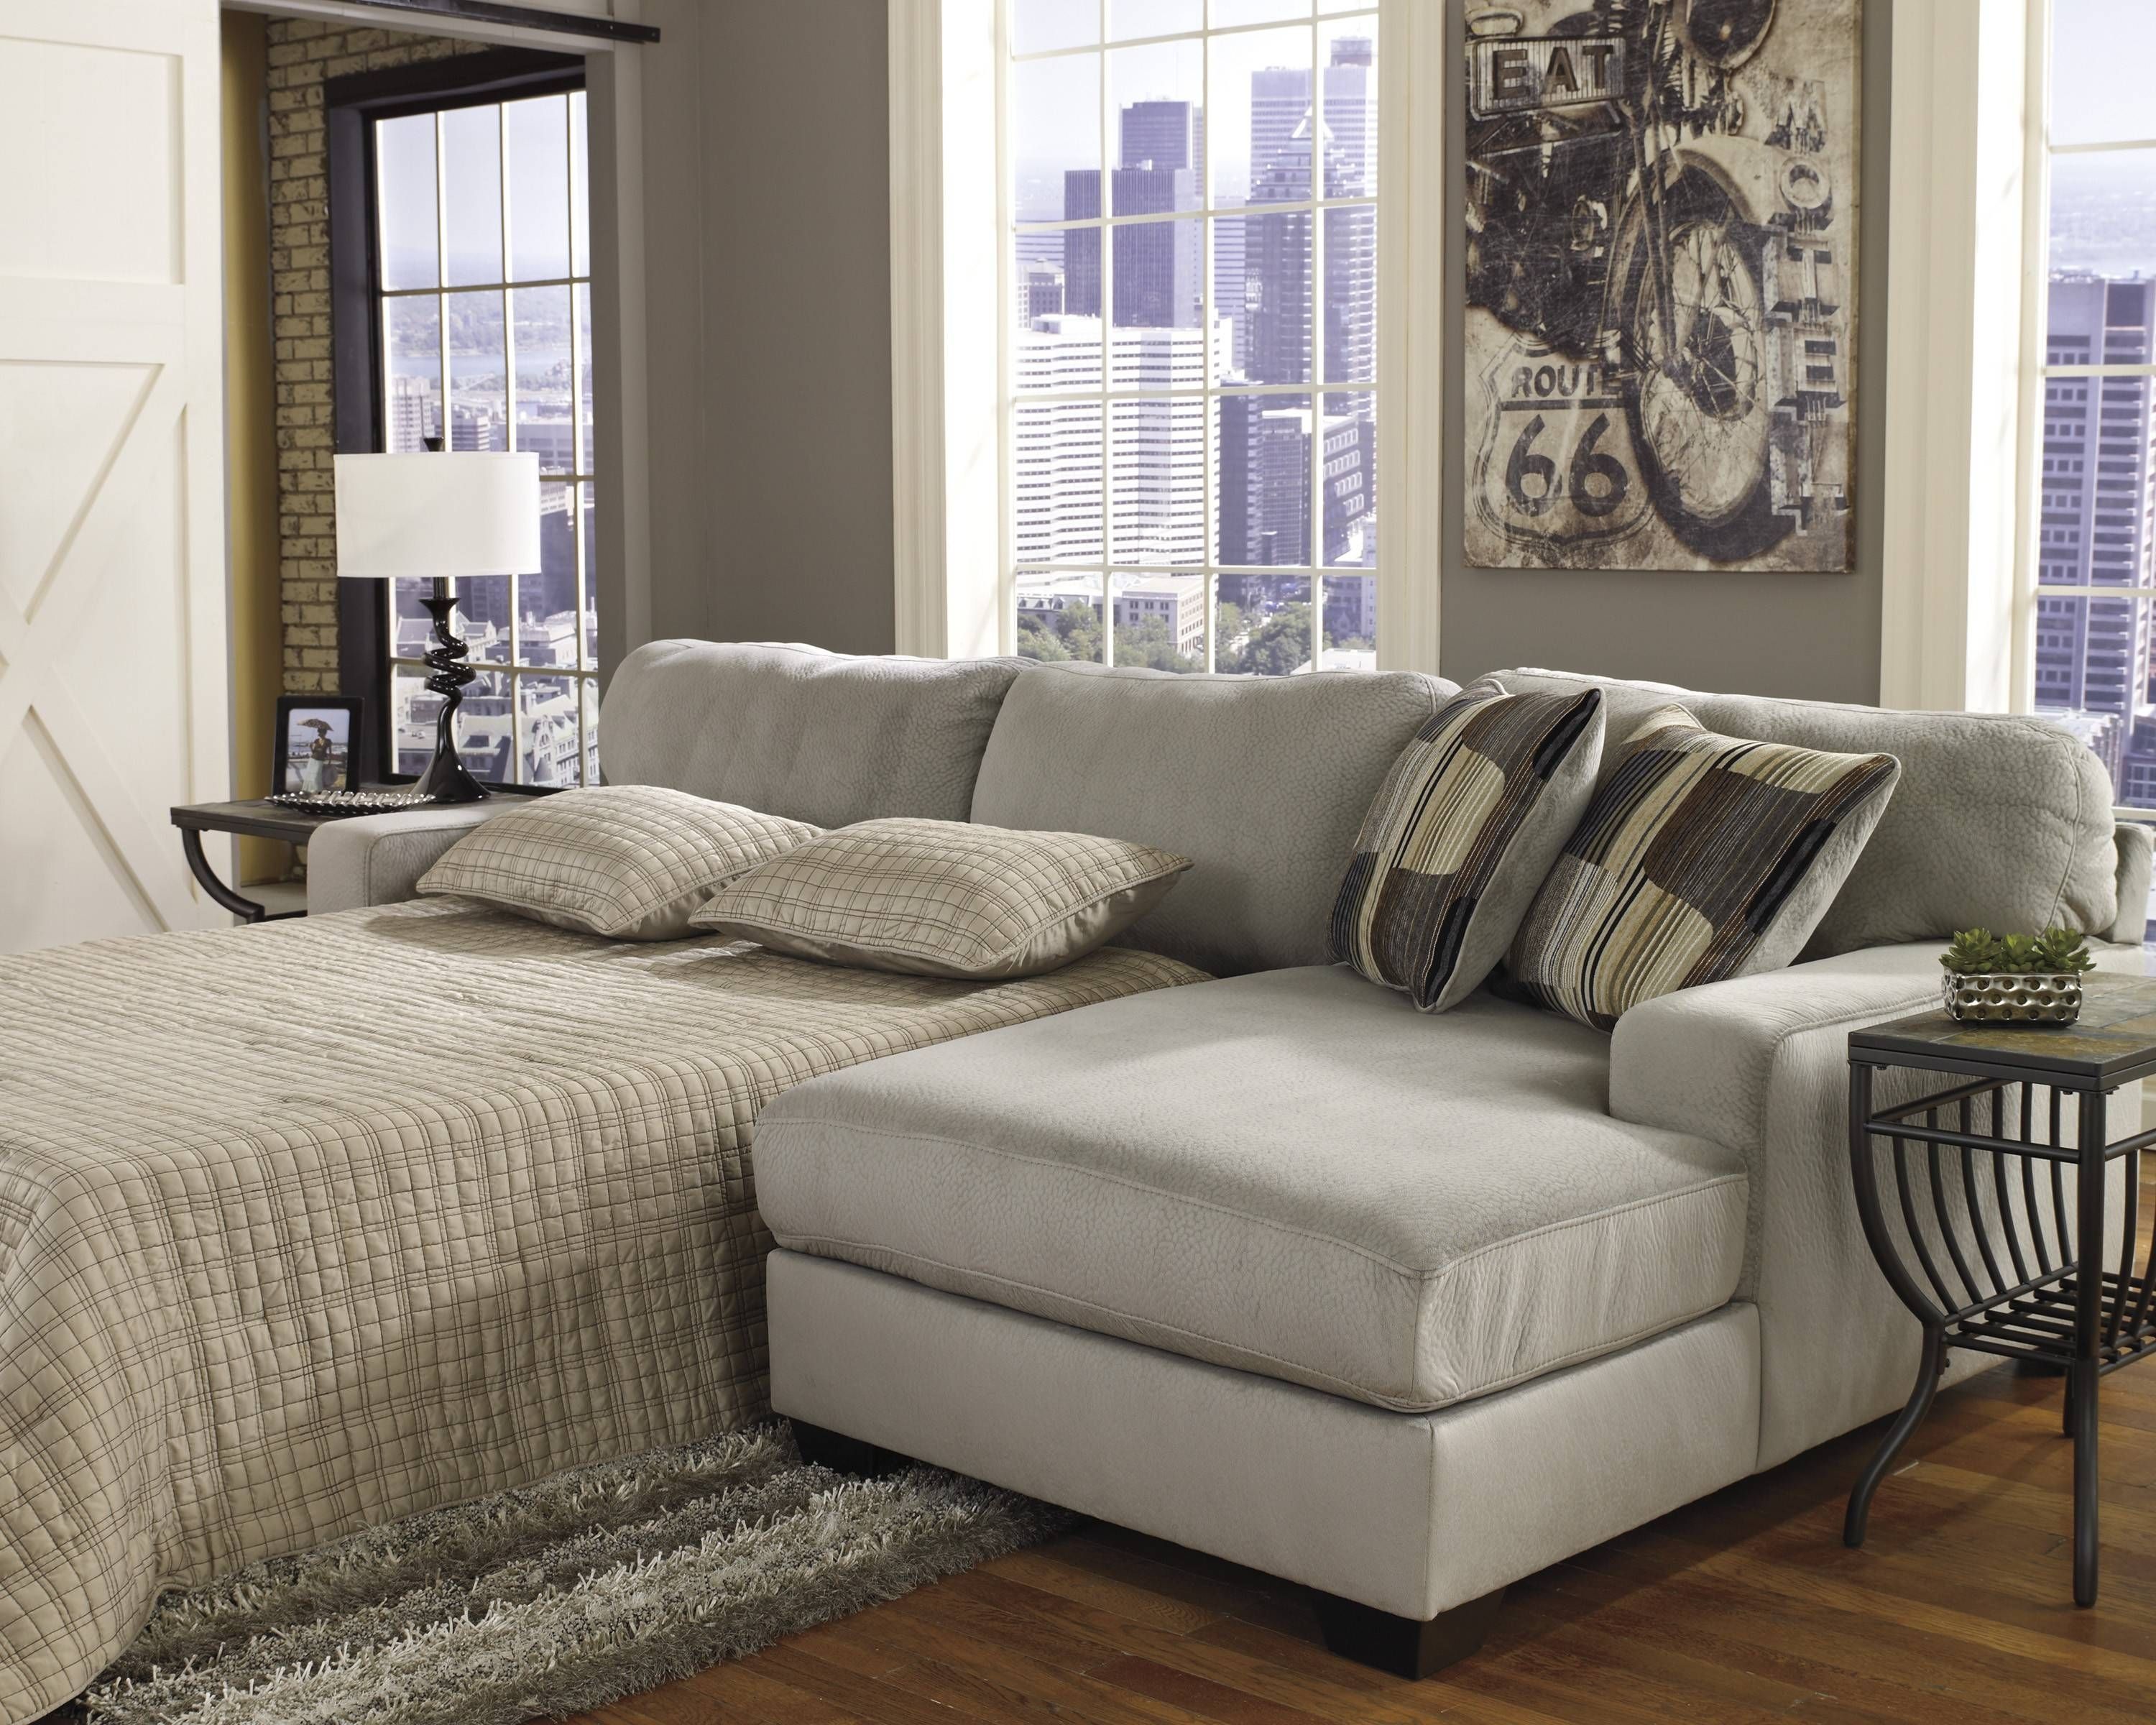 Apartment Sectional Sofa With Chaise | Tehranmix Decoration Inside Apartment Sectional Sofa With Chaise (View 4 of 30)